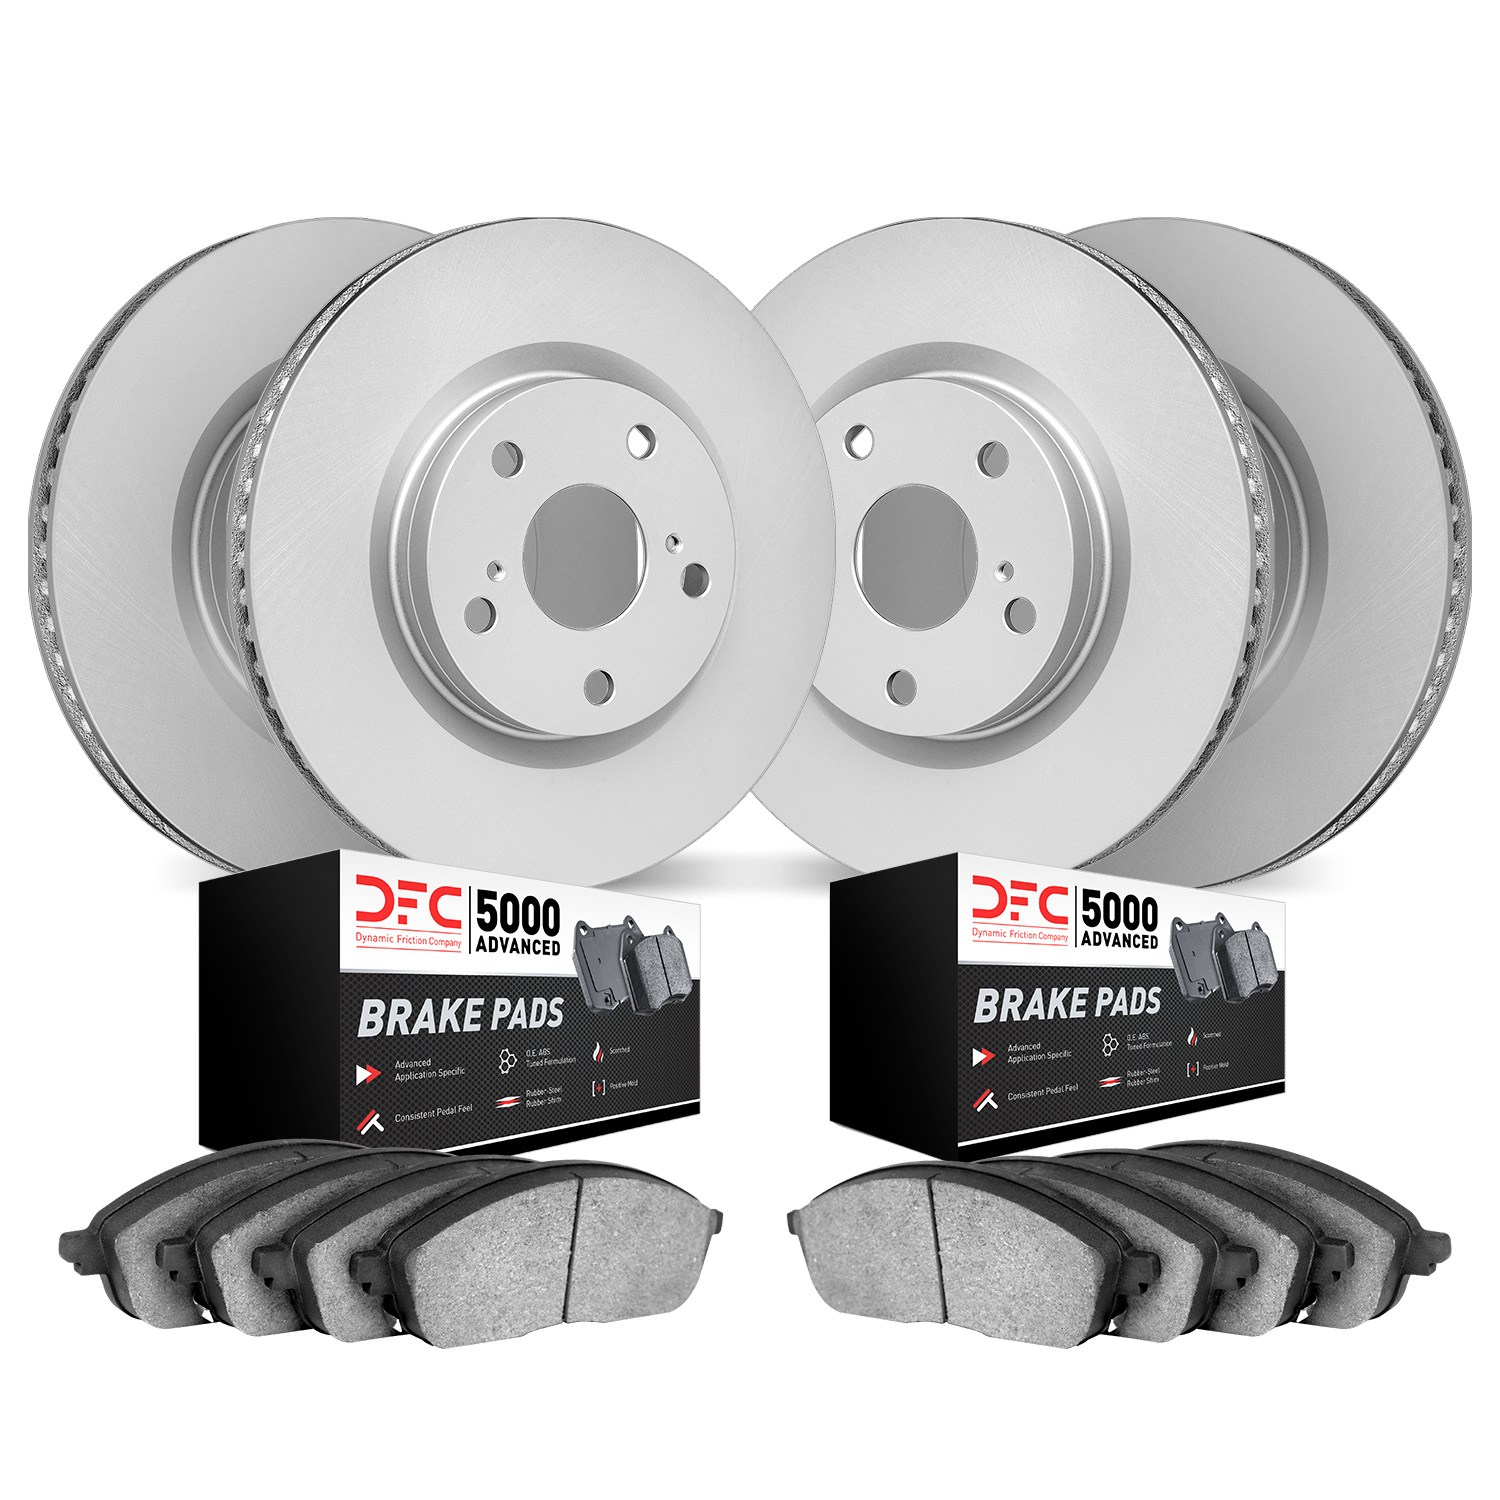 4504-46007 Geospec Brake Rotors w/5000 Advanced Brake Pads Kit, 2003-2005 GM, Position: Front and Rear